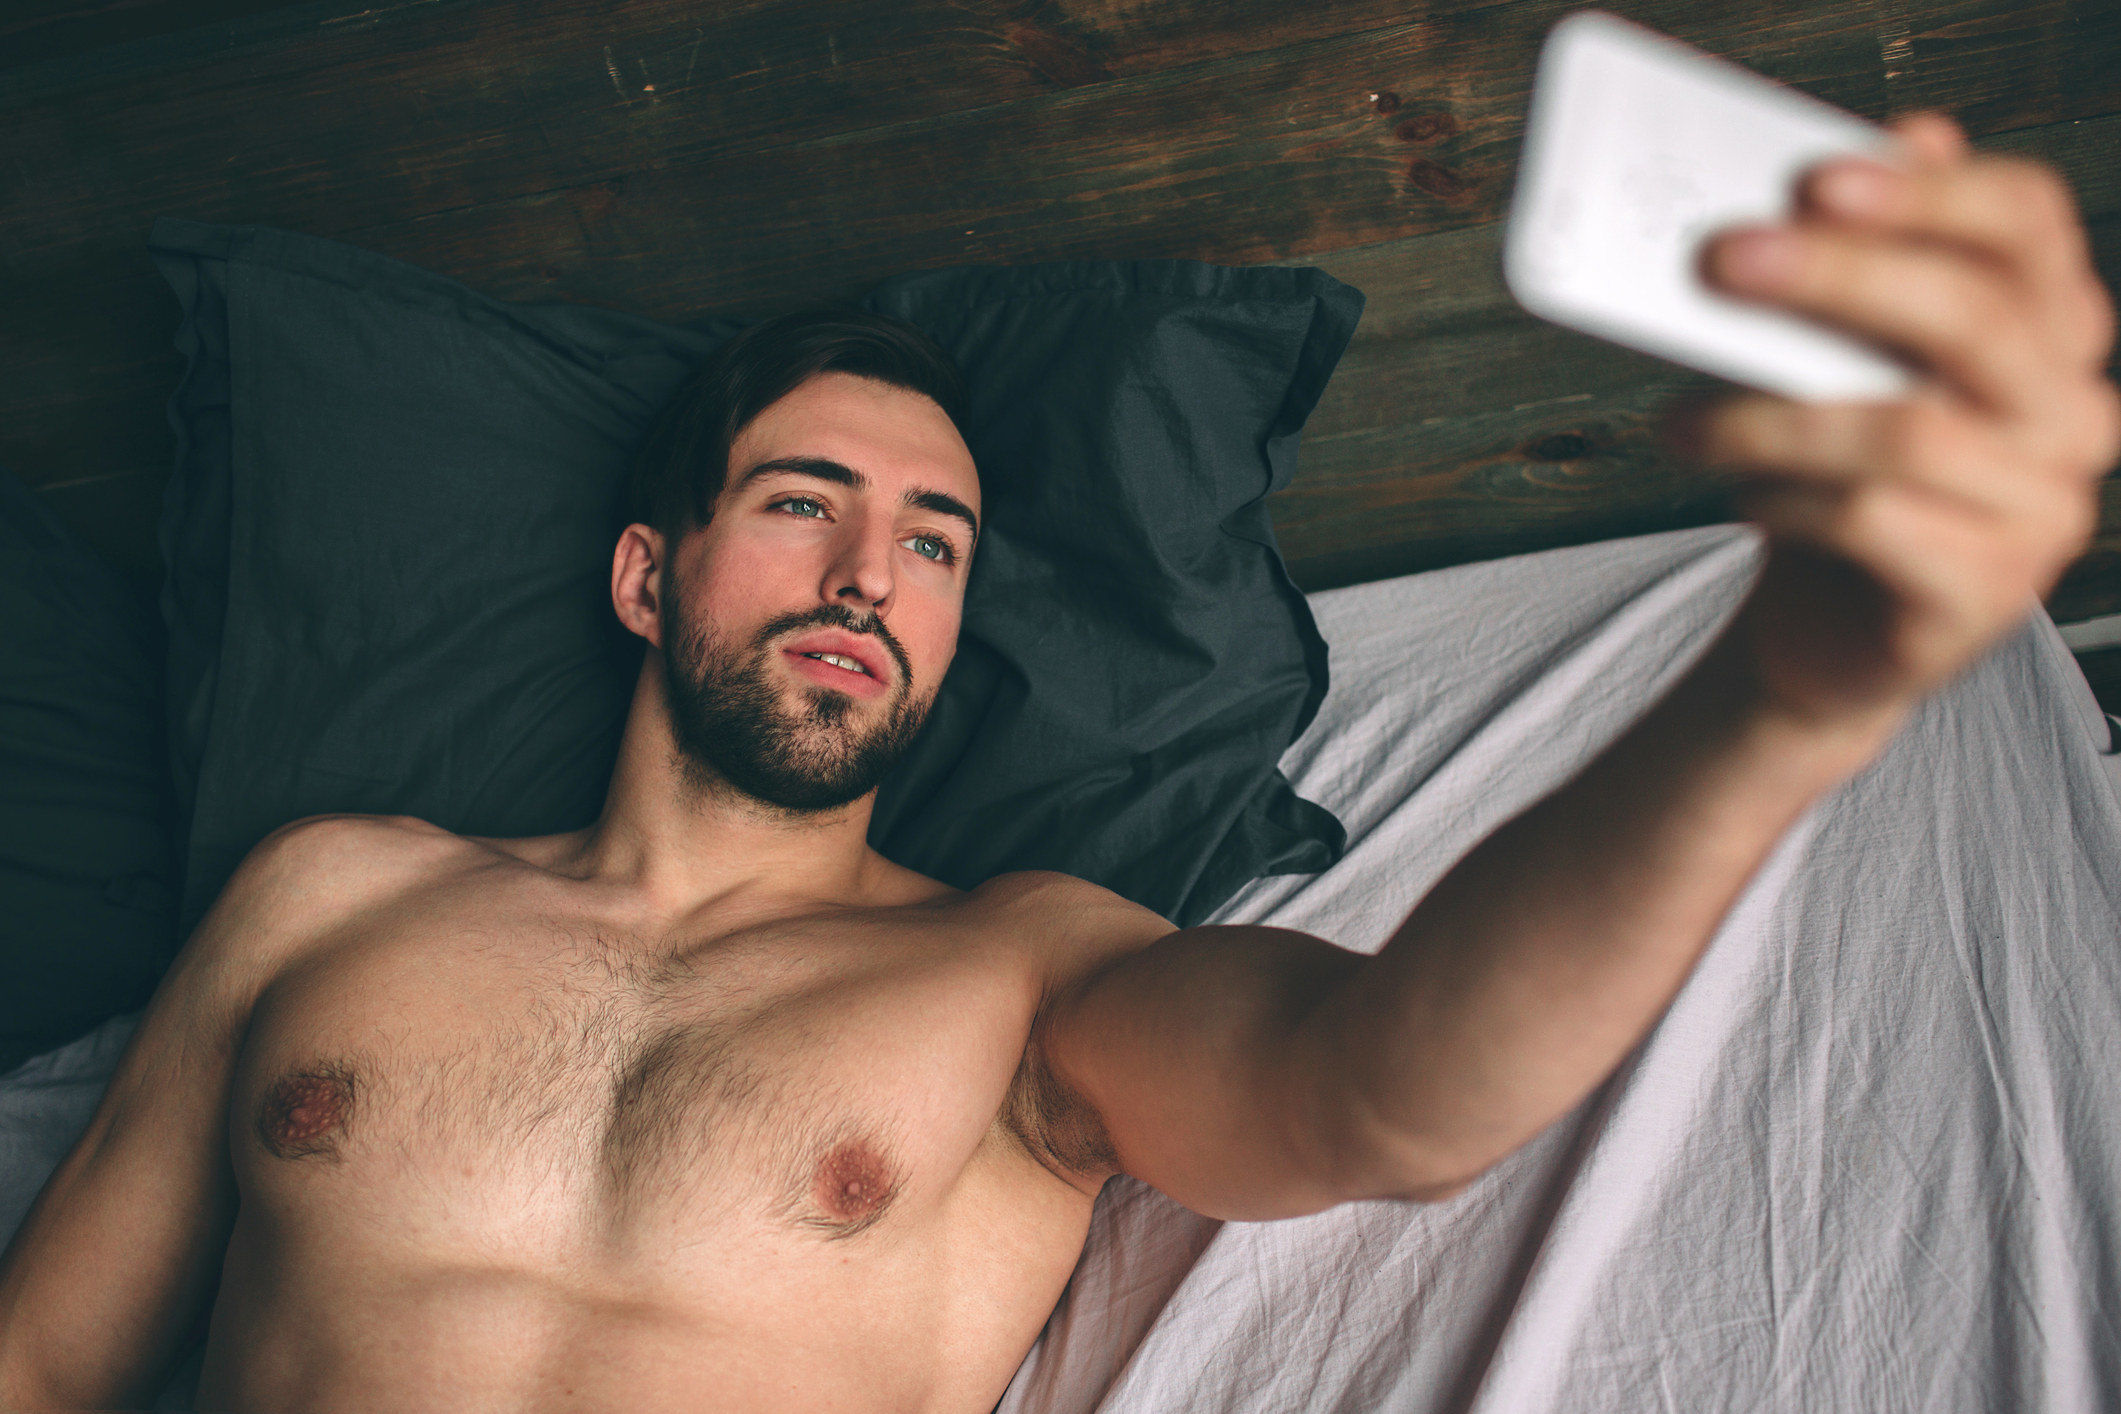 Naked, bearded, dark-haired handsome man shirtless in white bed taking a selfie